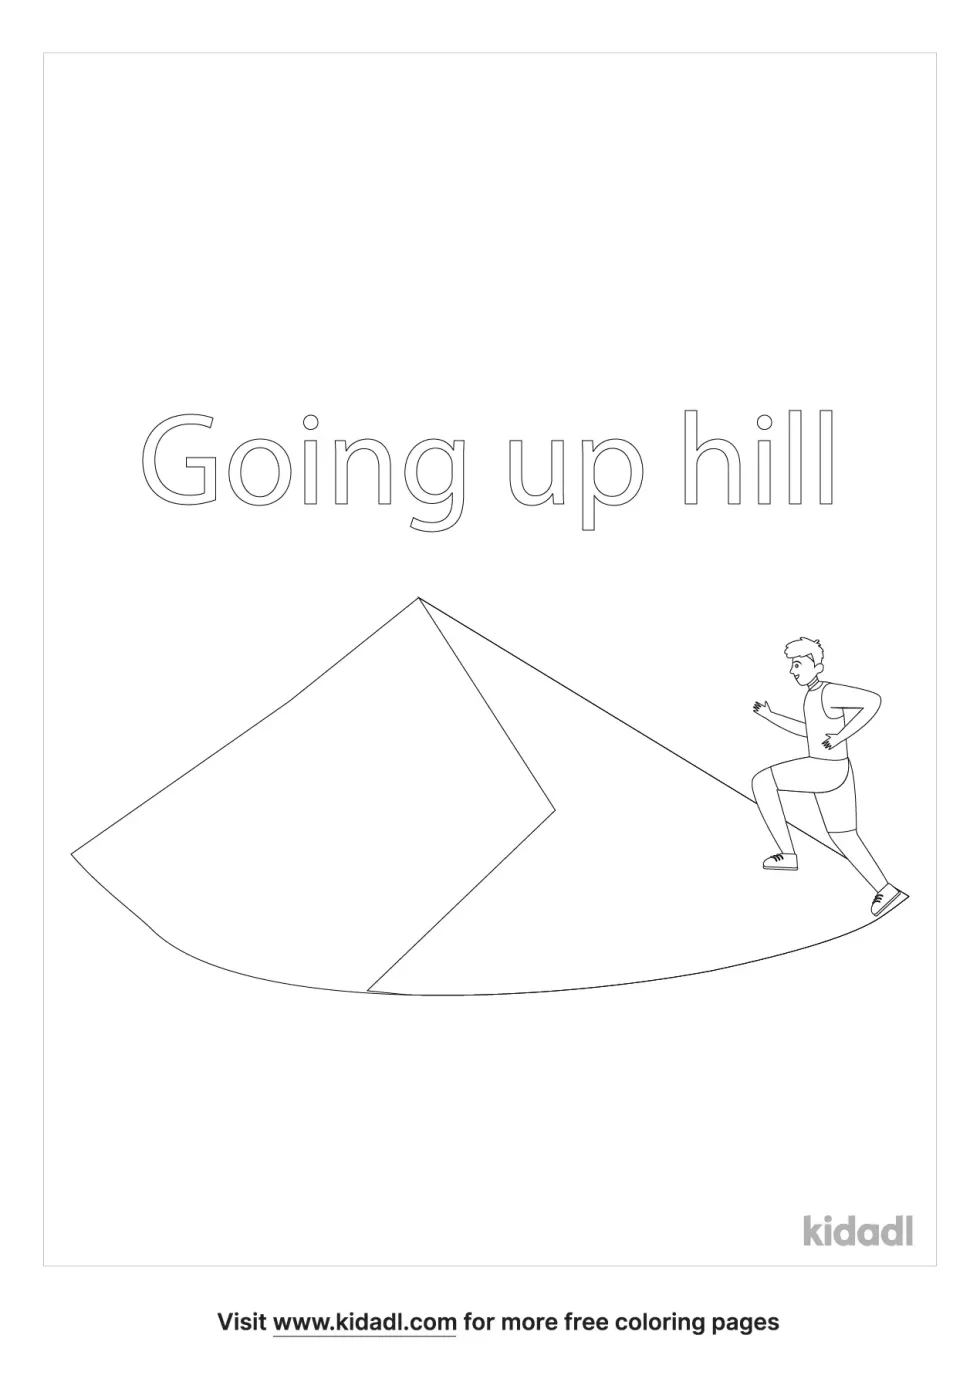 Going Up Hill